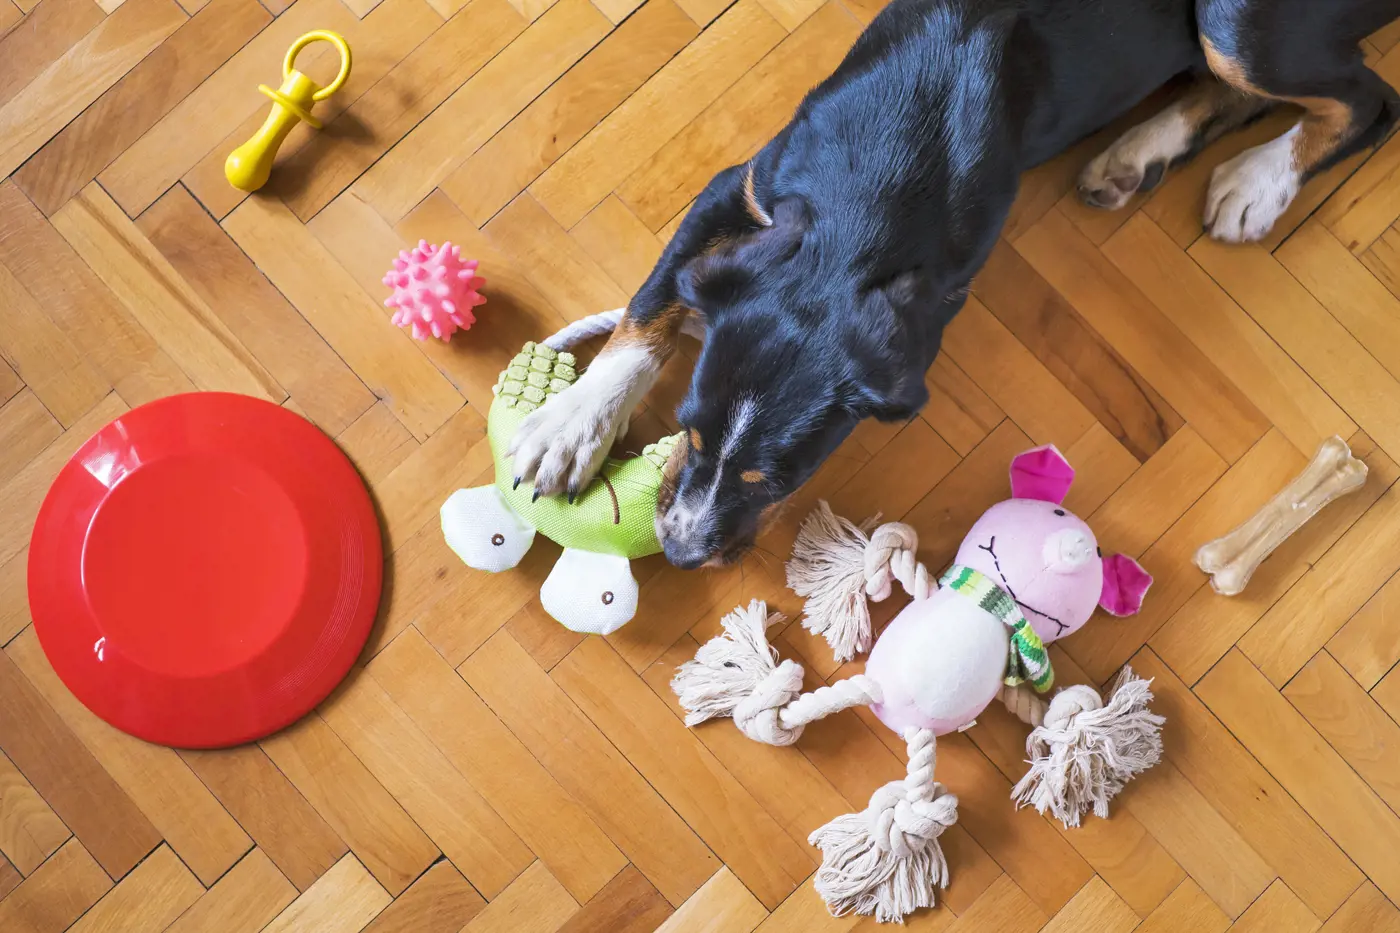 An overhead view of a dog surrounded by toys on a living room floor